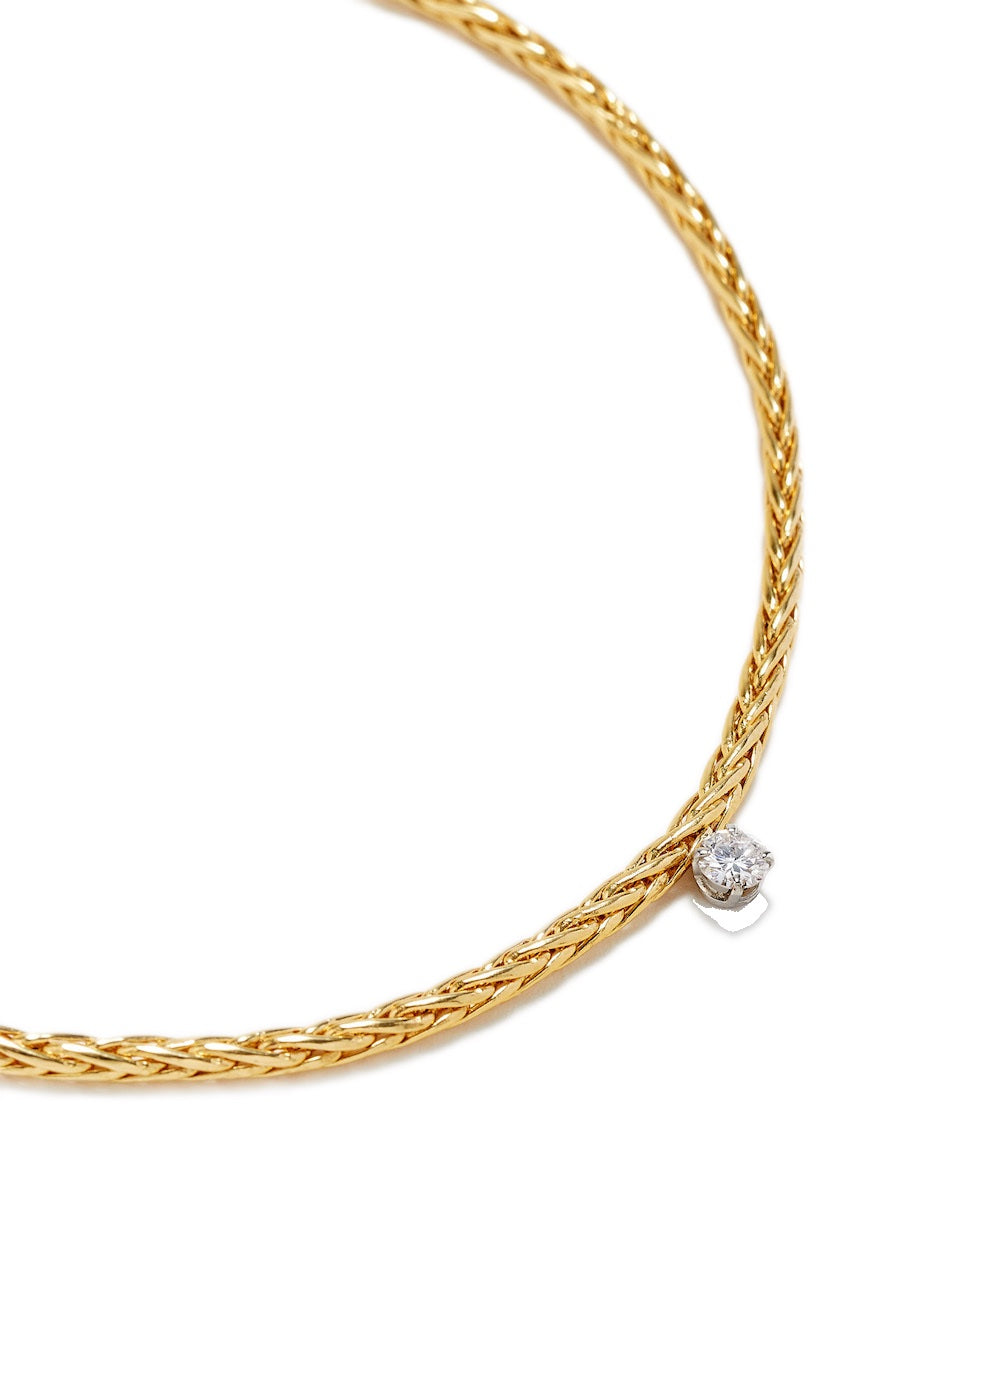 Maille Palmier 18k yellow gold diamond necklace